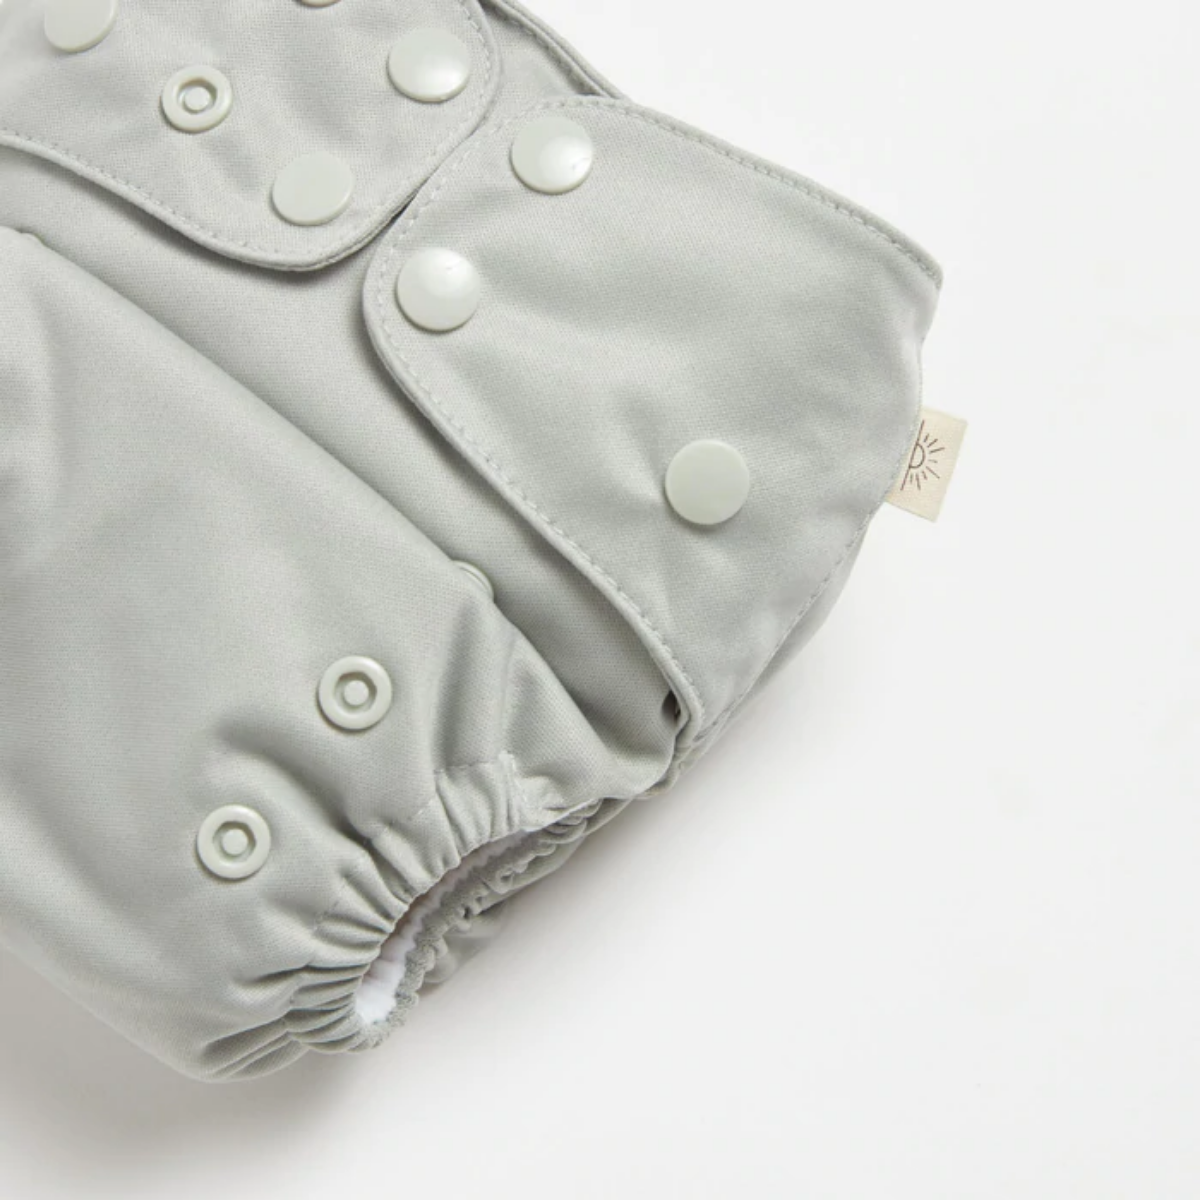 A close up of EcoNaps Sea Mist 2.0 modern cloth nappy, displayed on a white surface.